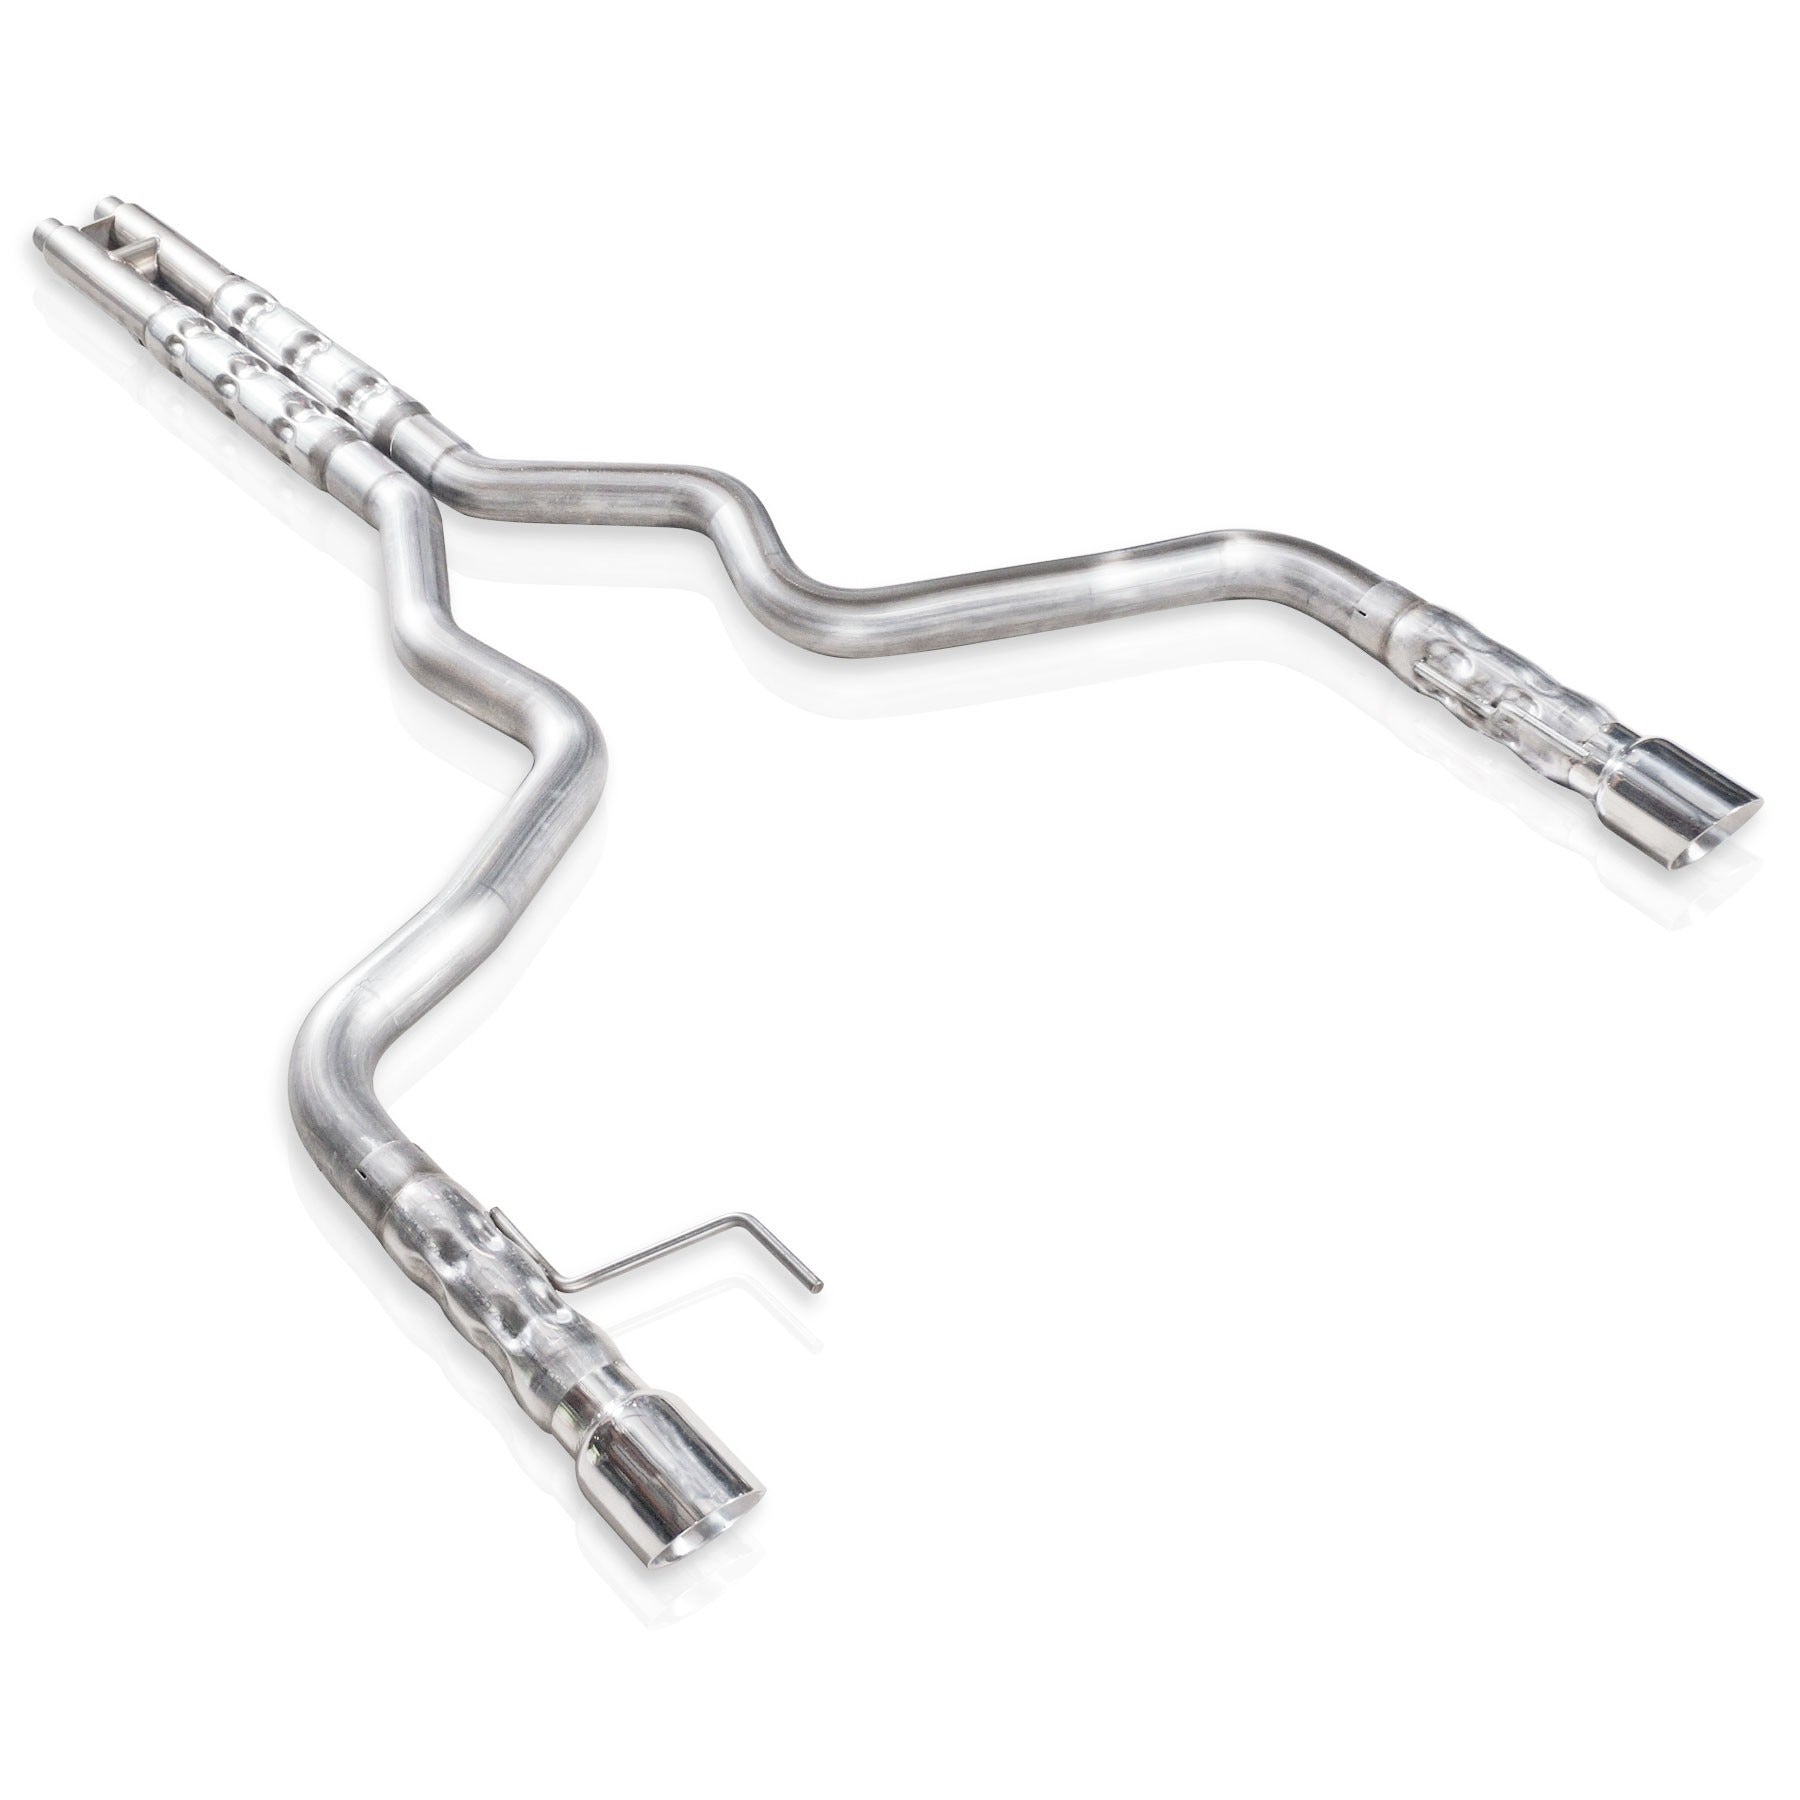 STAINLESS WORKS Mustang GT 5.0L 2015-2017 Cat-Back Exhaust Factory Connect H Pipe w/ 3" Muffler - Stainless (2015-2017 GT 5.0L V